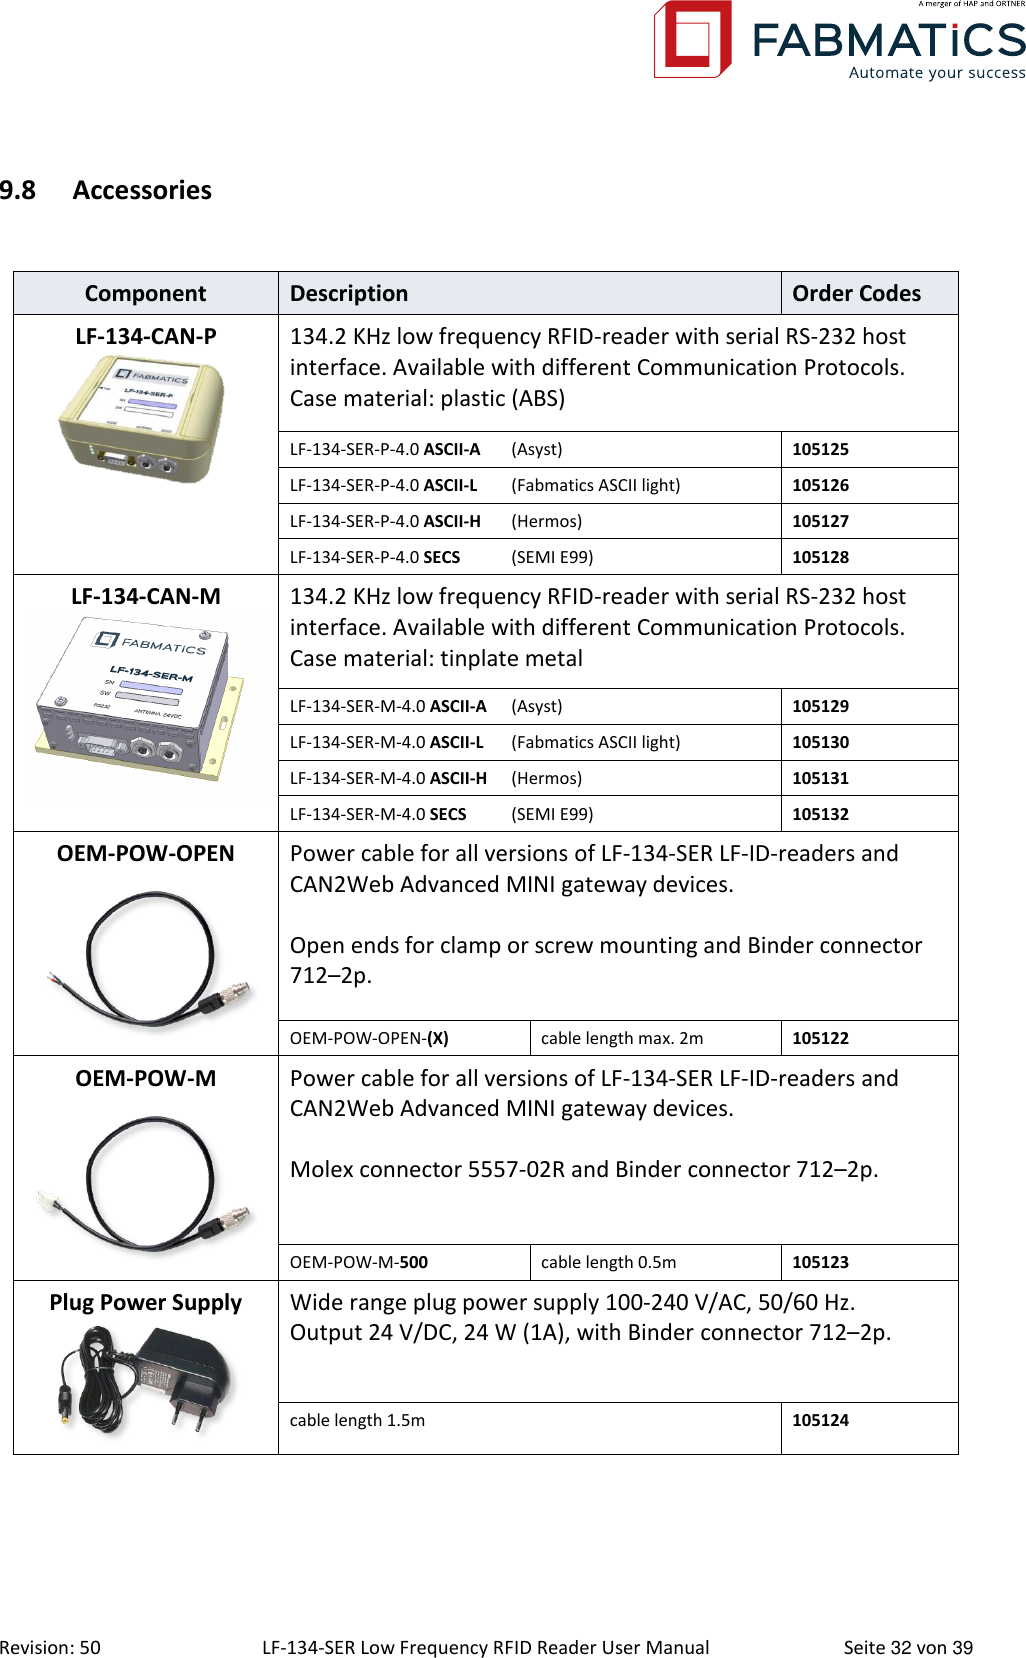  Revision: 50 LF-134-SER Low Frequency RFID Reader User Manual  Seite 32 von 39 9.8 Accessories   Component Description Order Codes LF-134-CAN-P  134.2 KHz low frequency RFID-reader with serial RS-232 host interface. Available with different Communication Protocols. Case material: plastic (ABS) LF-134-SER-P-4.0 ASCII-A  (Asyst) 105125 LF-134-SER-P-4.0 ASCII-L  (Fabmatics ASCII light) 105126 LF-134-SER-P-4.0 ASCII-H  (Hermos) 105127 LF-134-SER-P-4.0 SECS  (SEMI E99) 105128 LF-134-CAN-M  134.2 KHz low frequency RFID-reader with serial RS-232 host interface. Available with different Communication Protocols. Case material: tinplate metal LF-134-SER-M-4.0 ASCII-A  (Asyst) 105129 LF-134-SER-M-4.0 ASCII-L  (Fabmatics ASCII light) 105130 LF-134-SER-M-4.0 ASCII-H  (Hermos) 105131 LF-134-SER-M-4.0 SECS  (SEMI E99) 105132 OEM-POW-OPEN  Power cable for all versions of LF-134-SER LF-ID-readers and CAN2Web Advanced MINI gateway devices.  Open ends for clamp or screw mounting and Binder connector 712–2p. OEM-POW-OPEN-(X) cable length max. 2m 105122 OEM-POW-M  Power cable for all versions of LF-134-SER LF-ID-readers and CAN2Web Advanced MINI gateway devices.  Molex connector 5557-02R and Binder connector 712–2p. OEM-POW-M-500 cable length 0.5m 105123 Plug Power Supply  Wide range plug power supply 100-240 V/AC, 50/60 Hz. Output 24 V/DC, 24 W (1A), with Binder connector 712–2p. cable length 1.5m 105124 